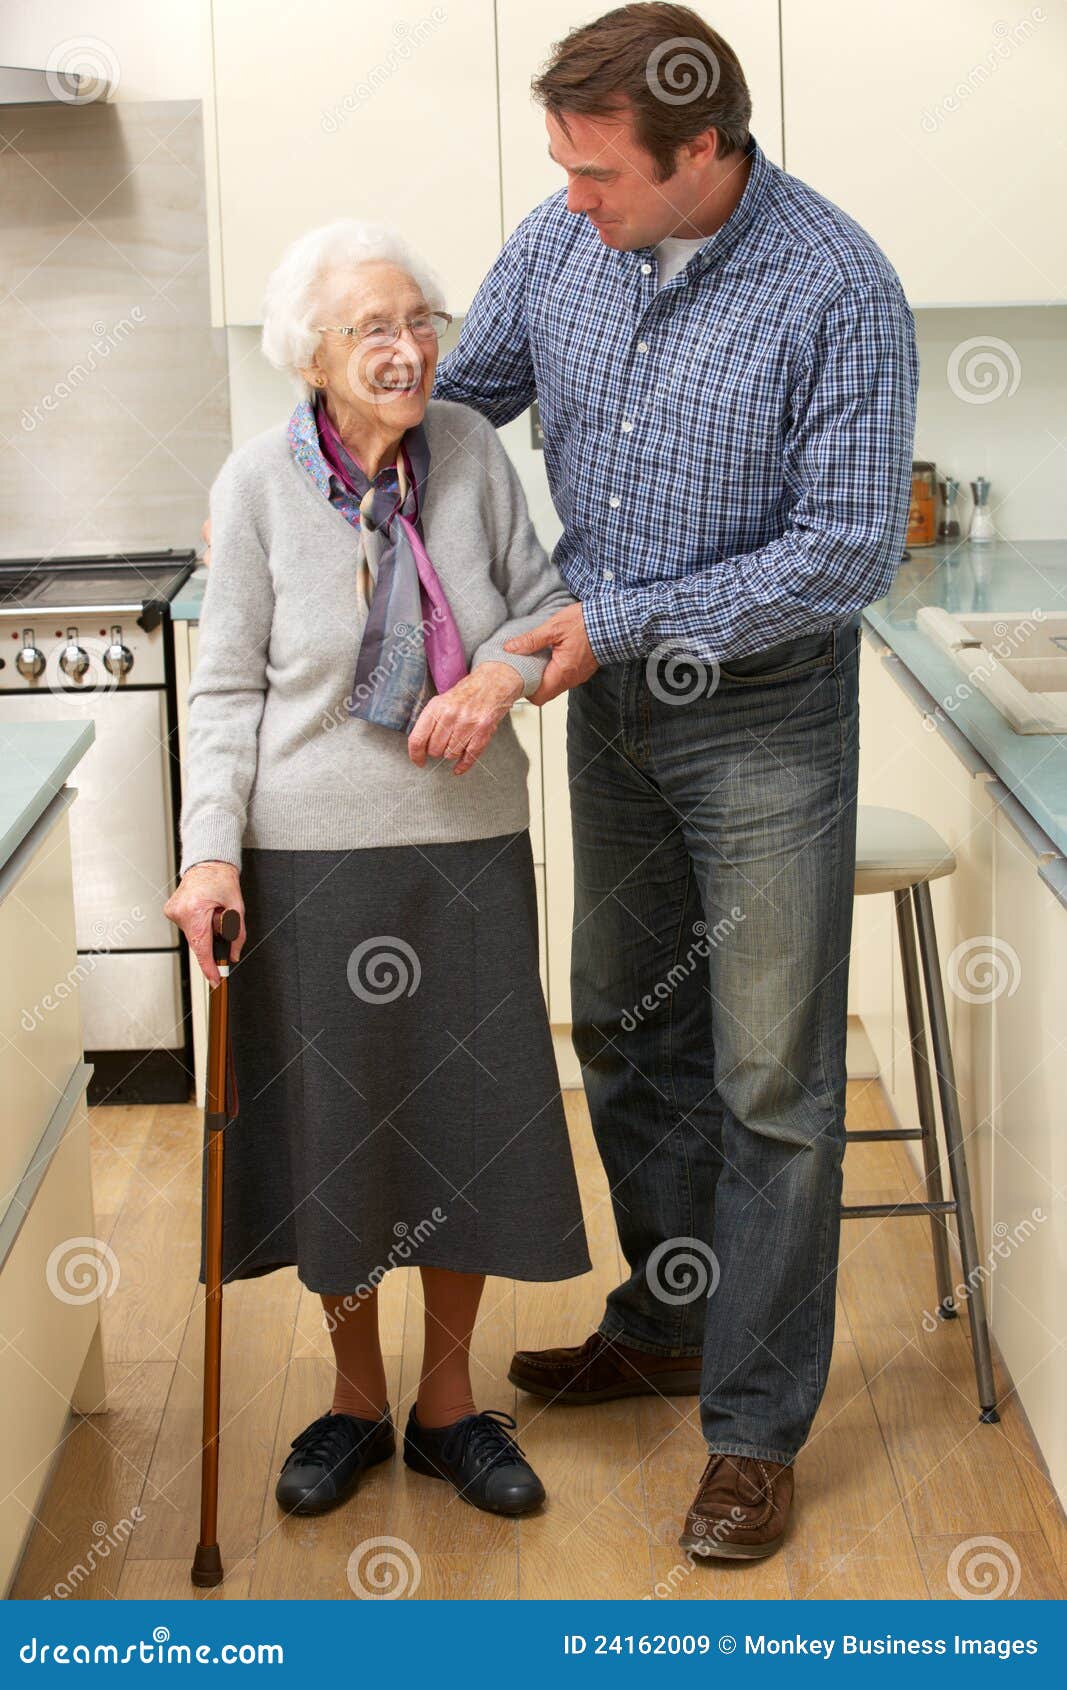 http://thumbs.dreamstime.com/z/mother-adult-son-kitchen-24162009.jpg